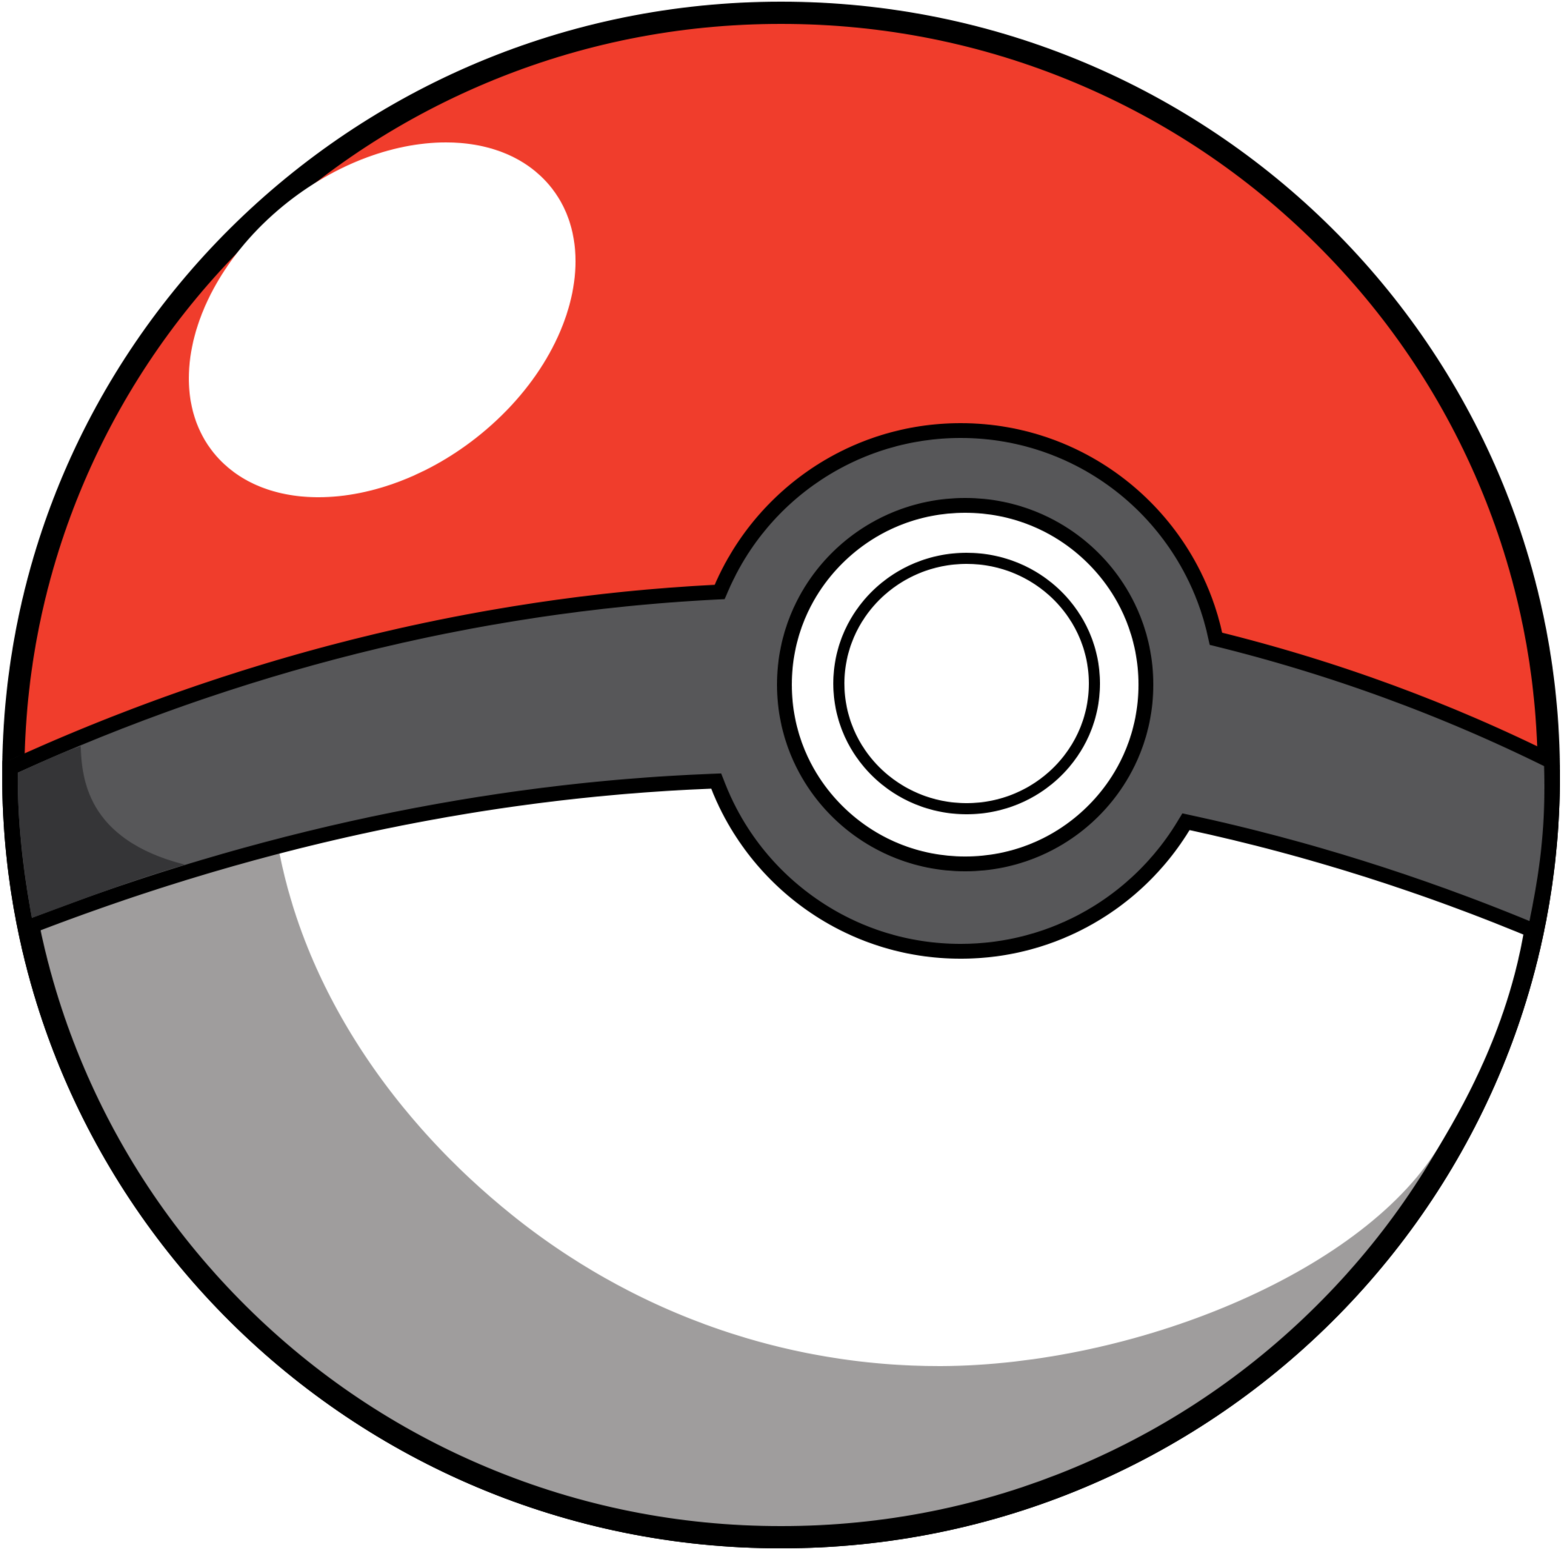 Pokeball Pokeball Png 1600x1600 Png Clipart Download